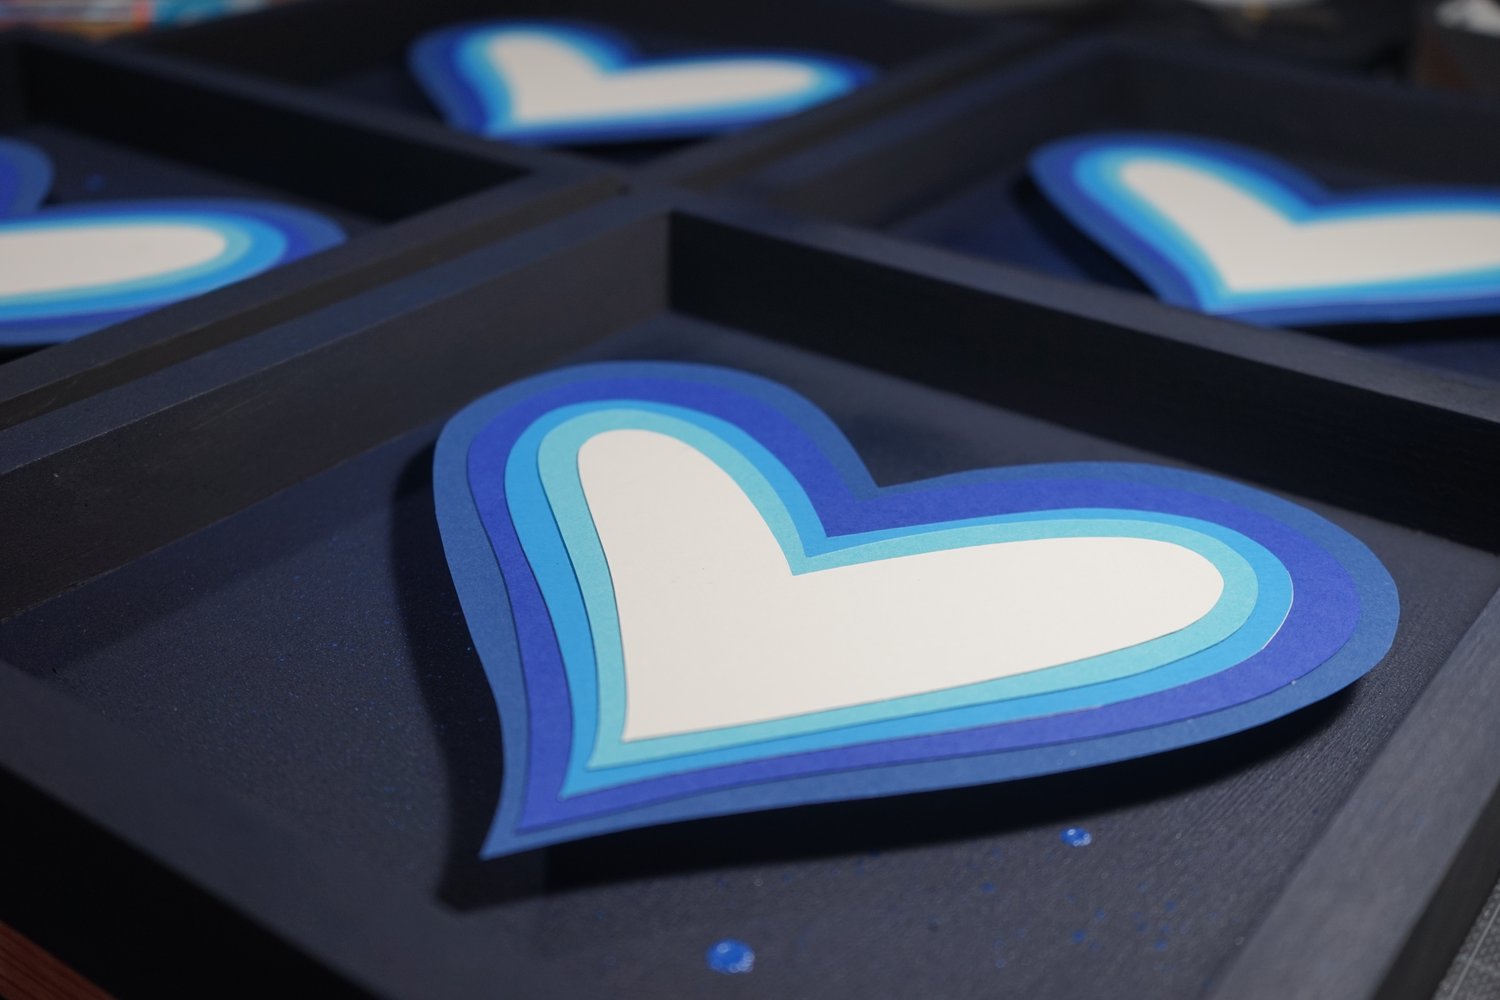 Image of Blue Heart 6/20 #2